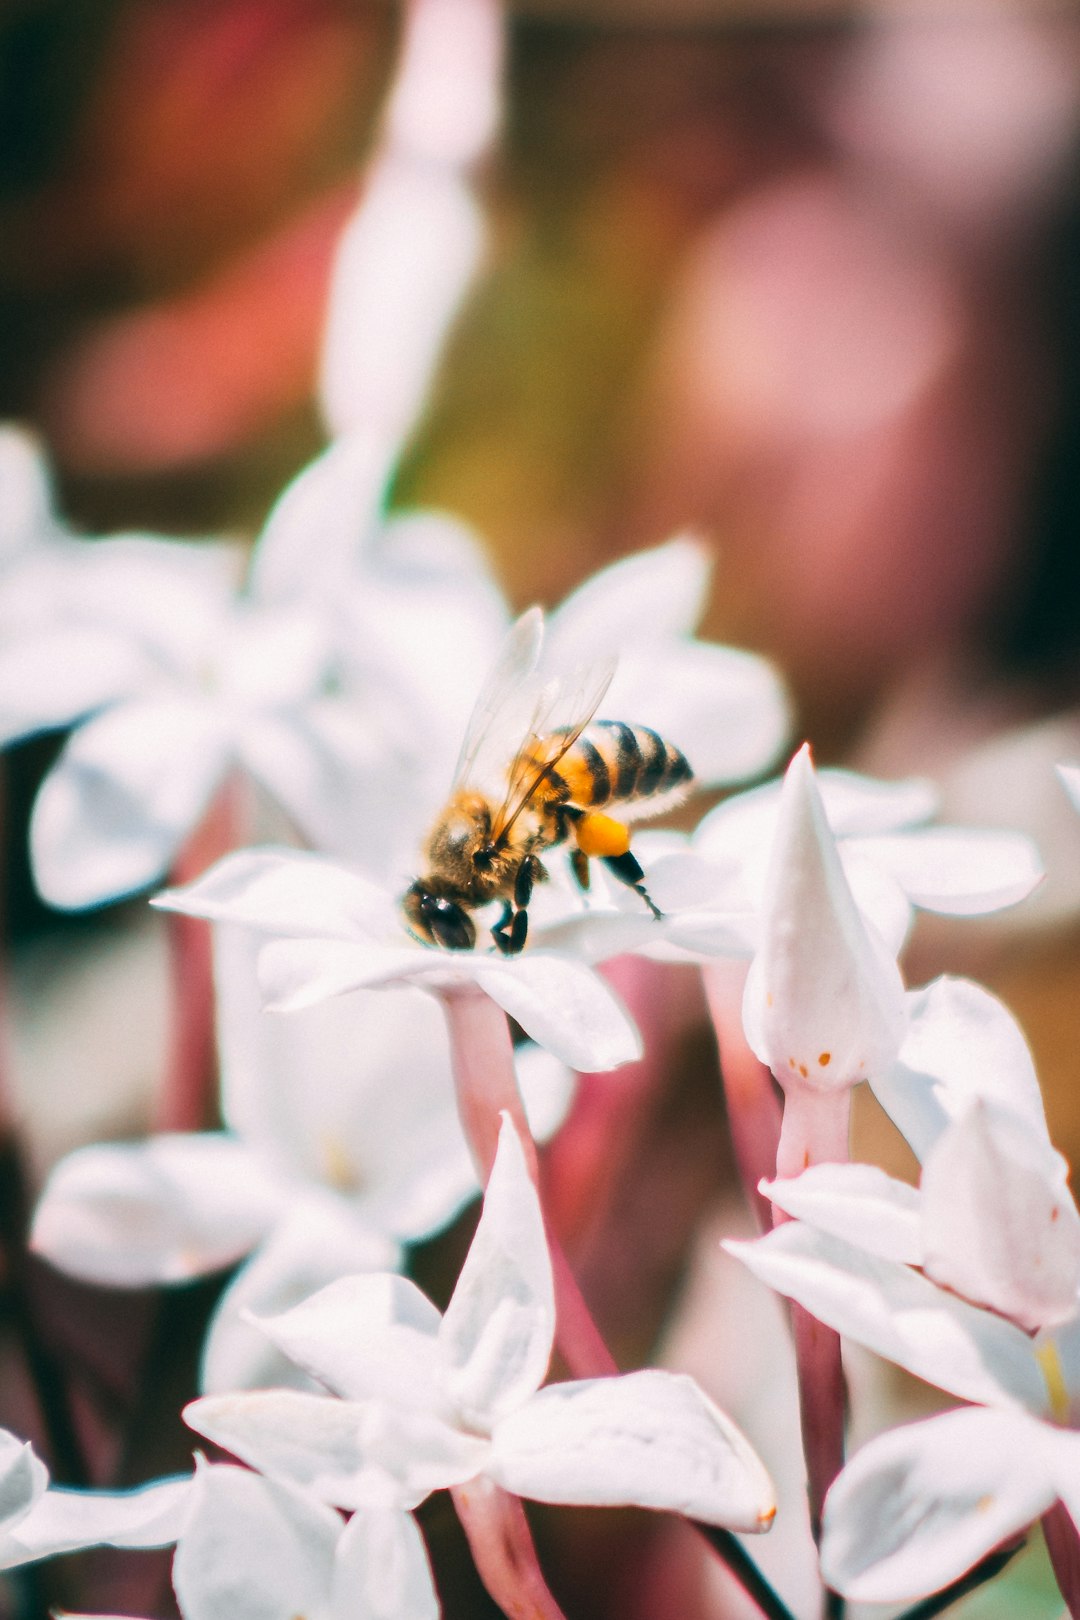 honeybee perched on white and pink flower in close up photography during daytime